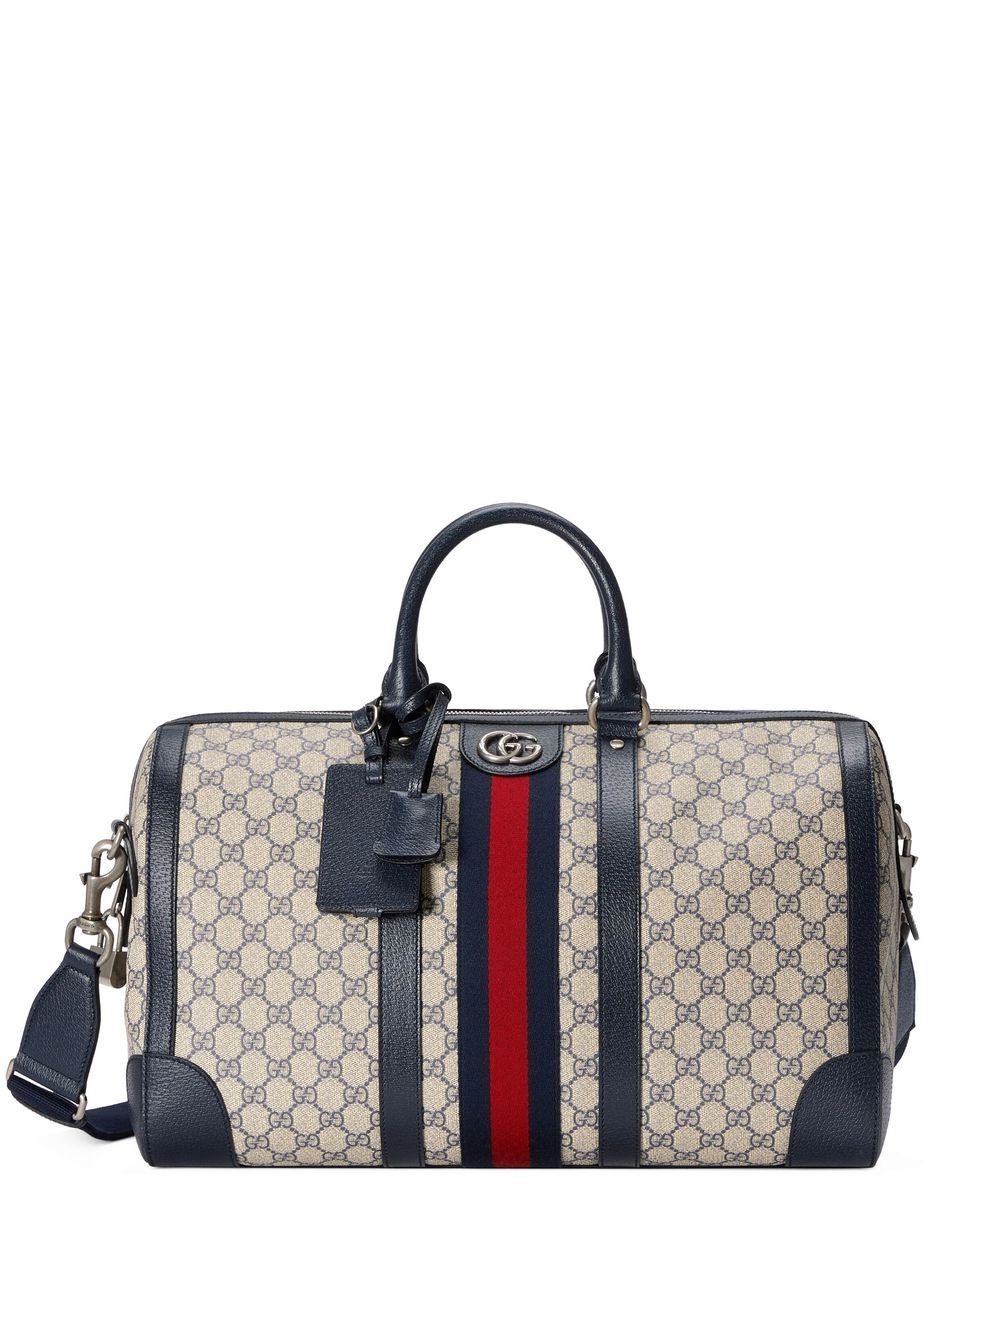 Gucci Large Ophidia Duffle Bag - Grey